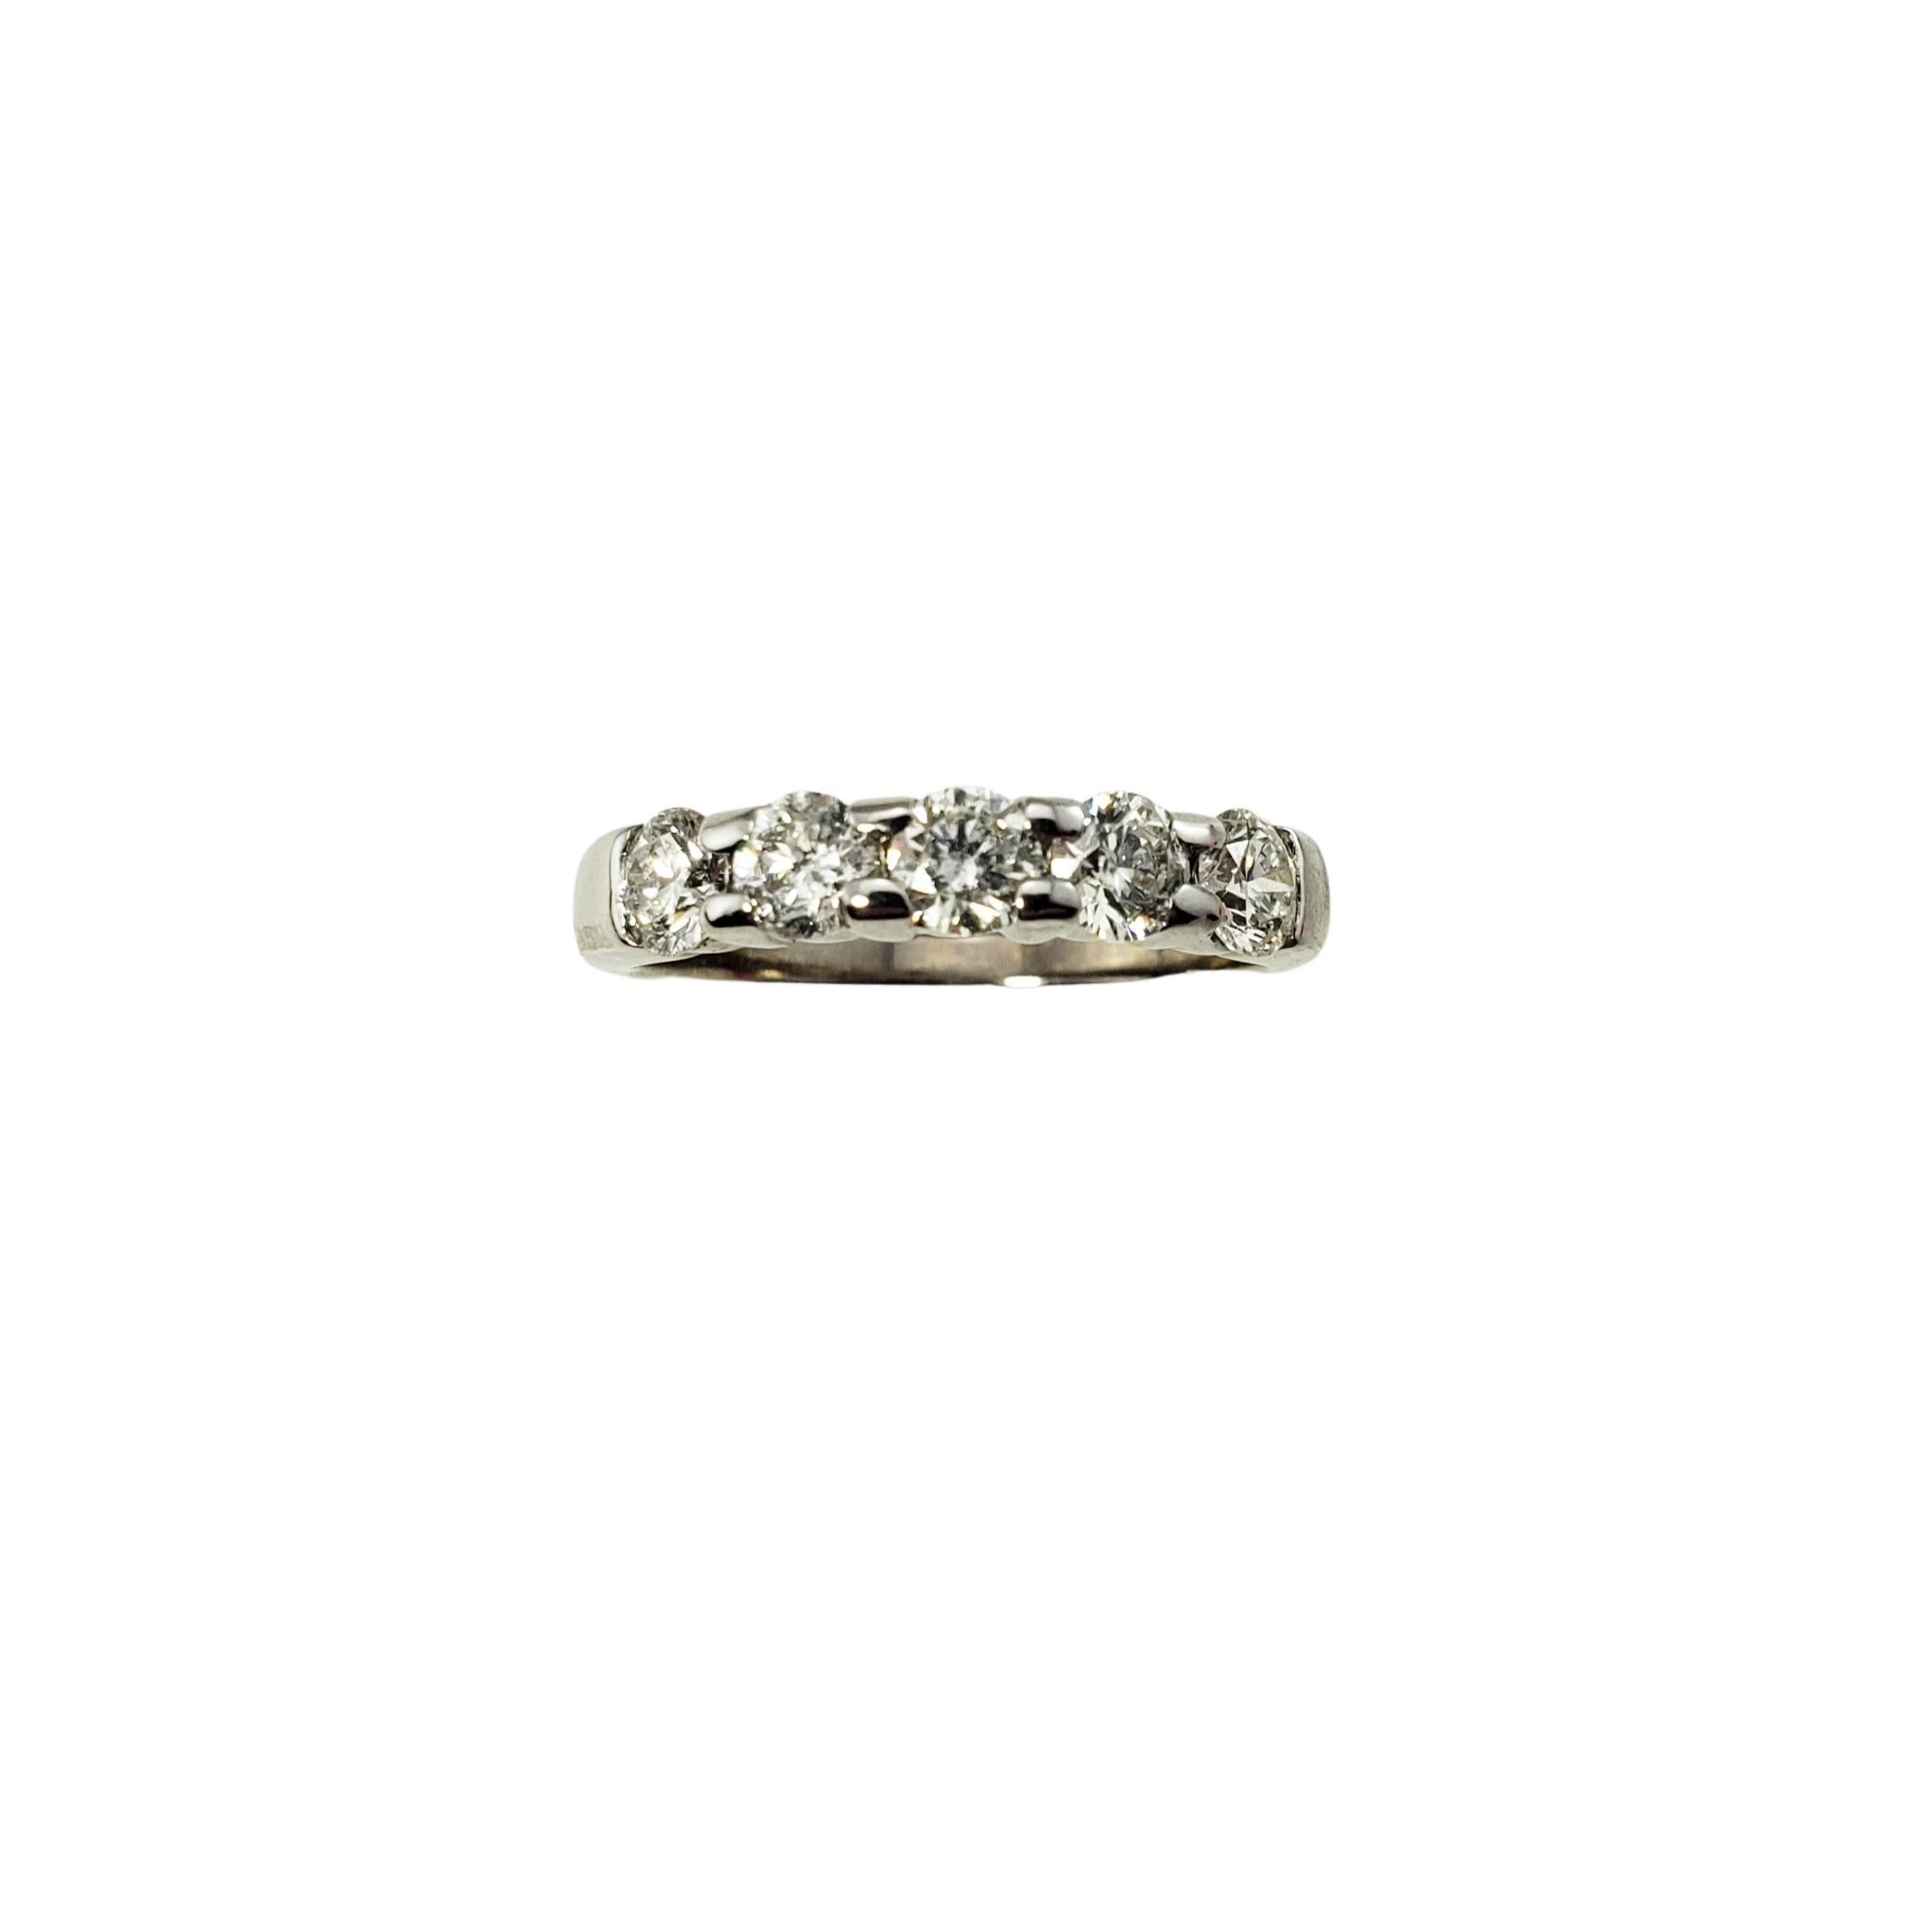 14 Karat White Gold and Diamond Wedding/Anniversary Band Ring Size 7-

This sparkling band features five round brilliant cut diamonds set in classic 14K white gold.  Width:  4 mm.  Shank:  2 mm.

Approximate total diamond weight: 1.0 ct.

Diamond